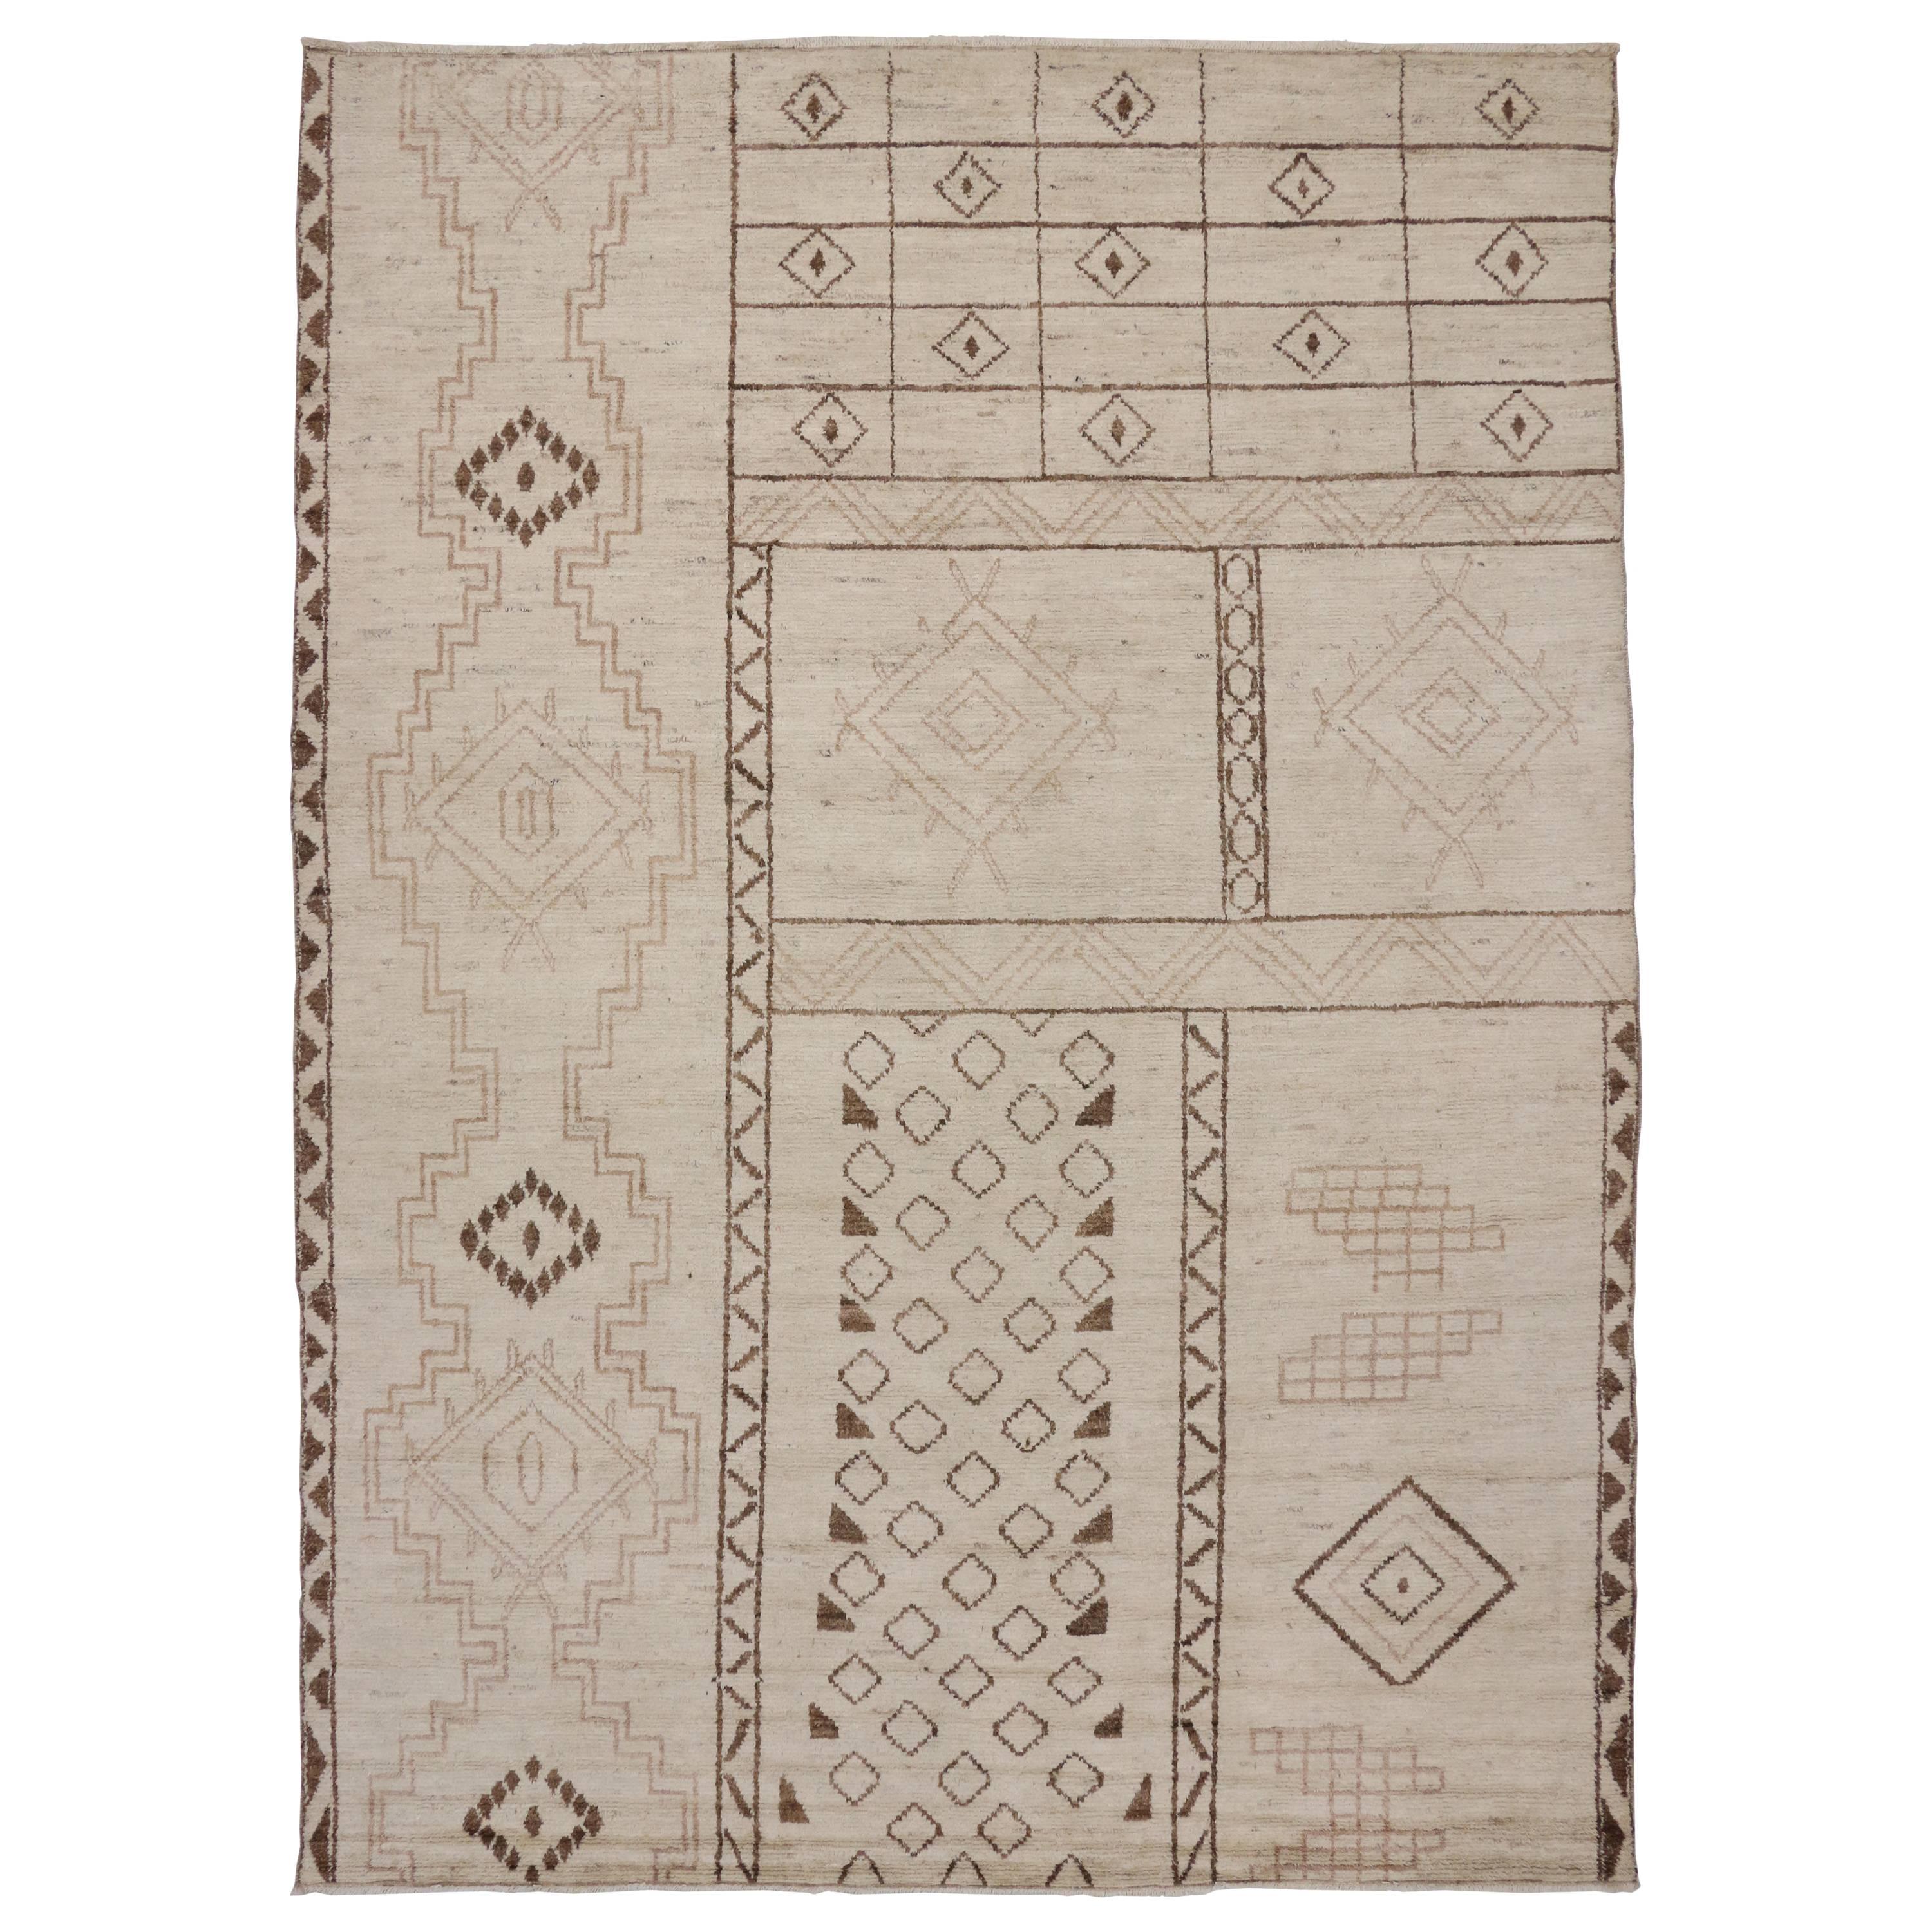 Contemporary Moroccan Area Rug with Tribal Design